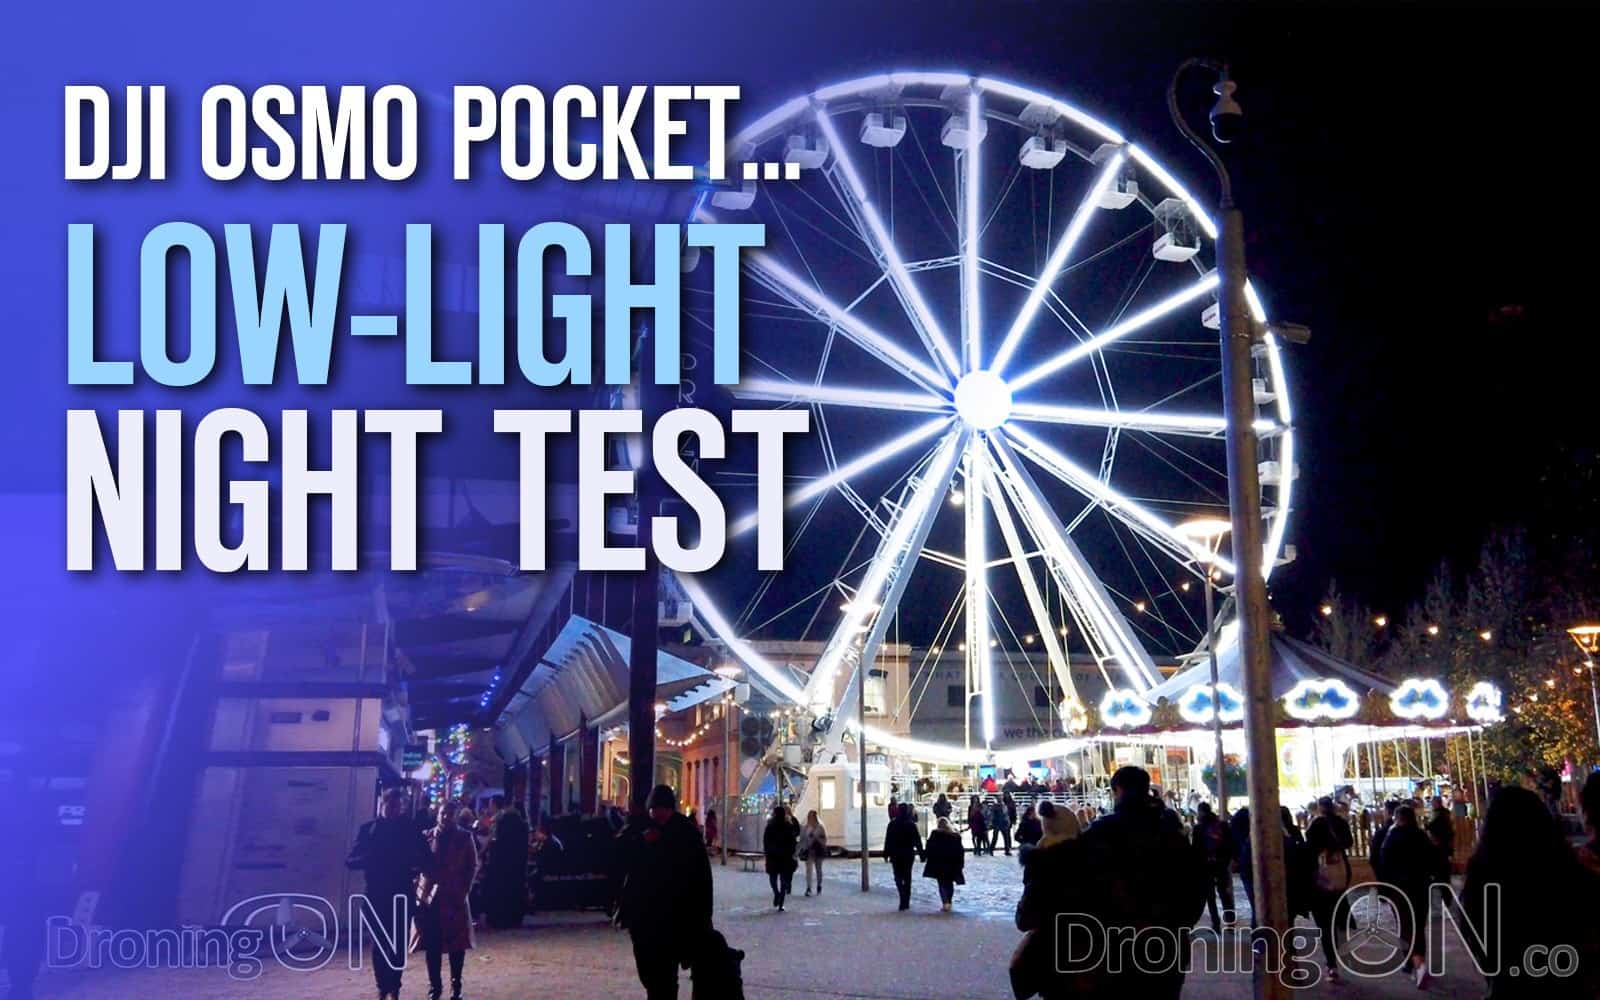 Full low-light and night testing of the DJI Osmo Pocket